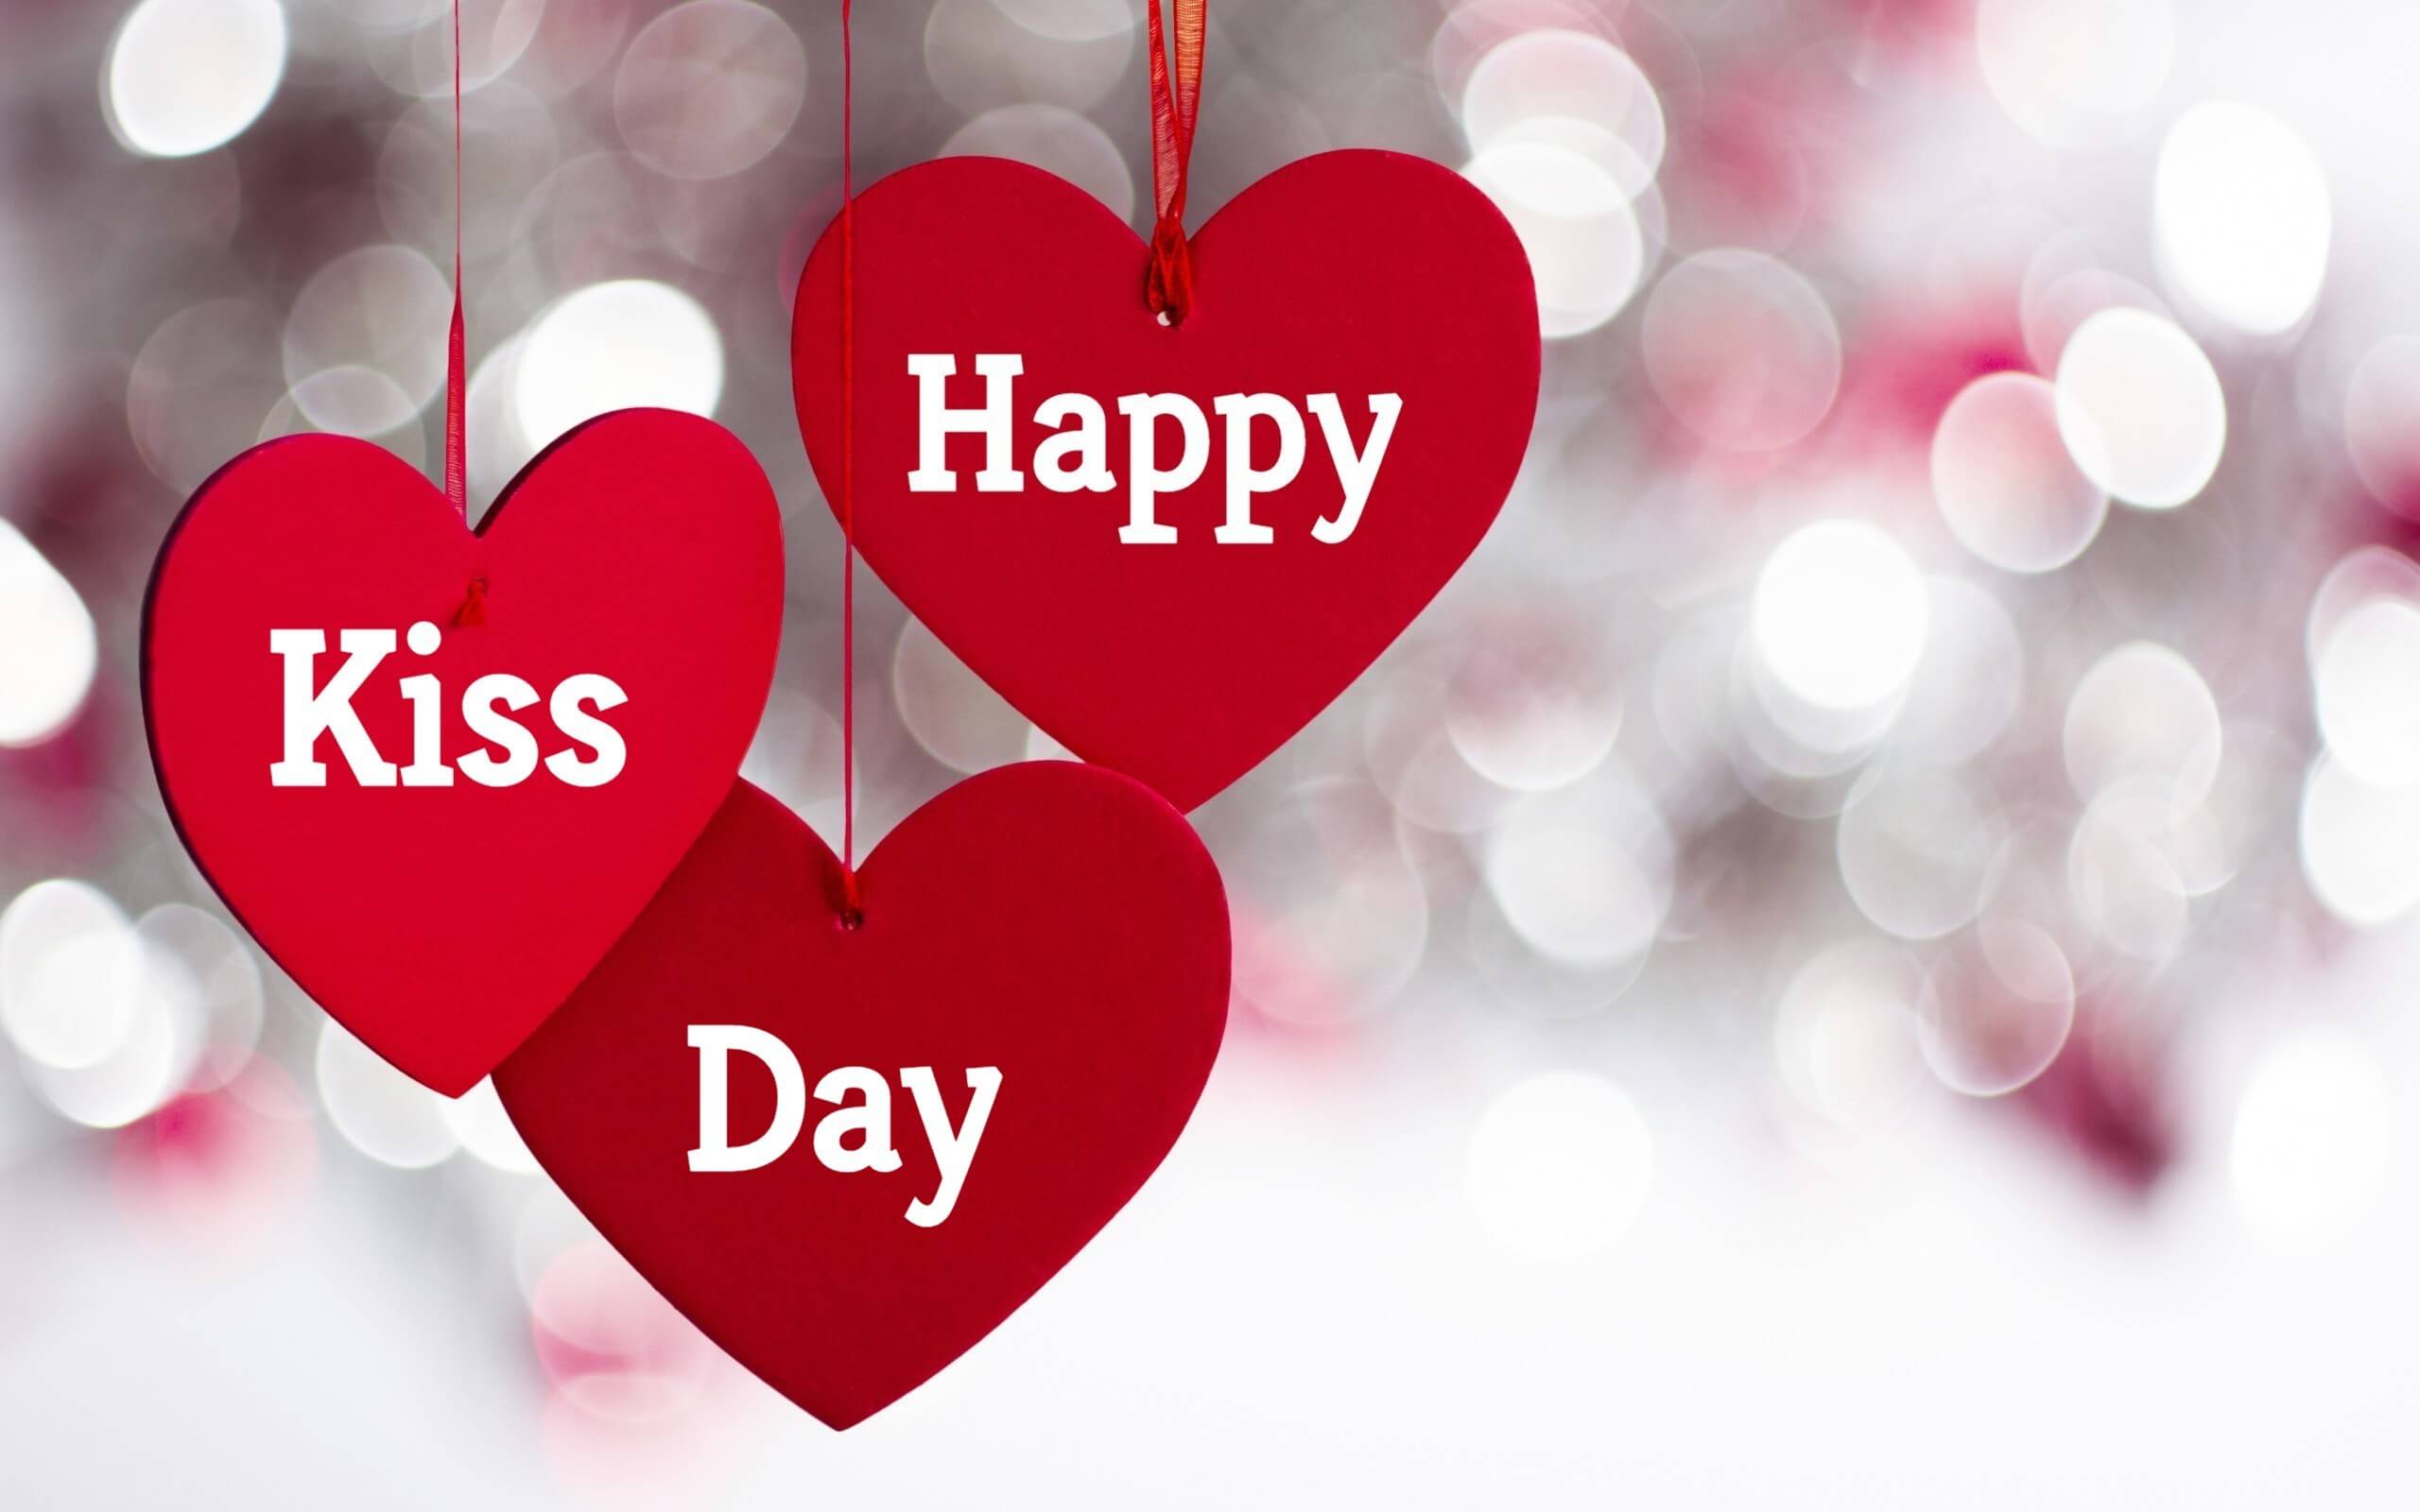 Kiss Day 2022 Images  Valentines Day HD Wallpapers for Free Download  Online Wish Happy Kiss Day With WhatsApp Messages Quotes  GIFs To  Celebrate Day of Love   LatestLY